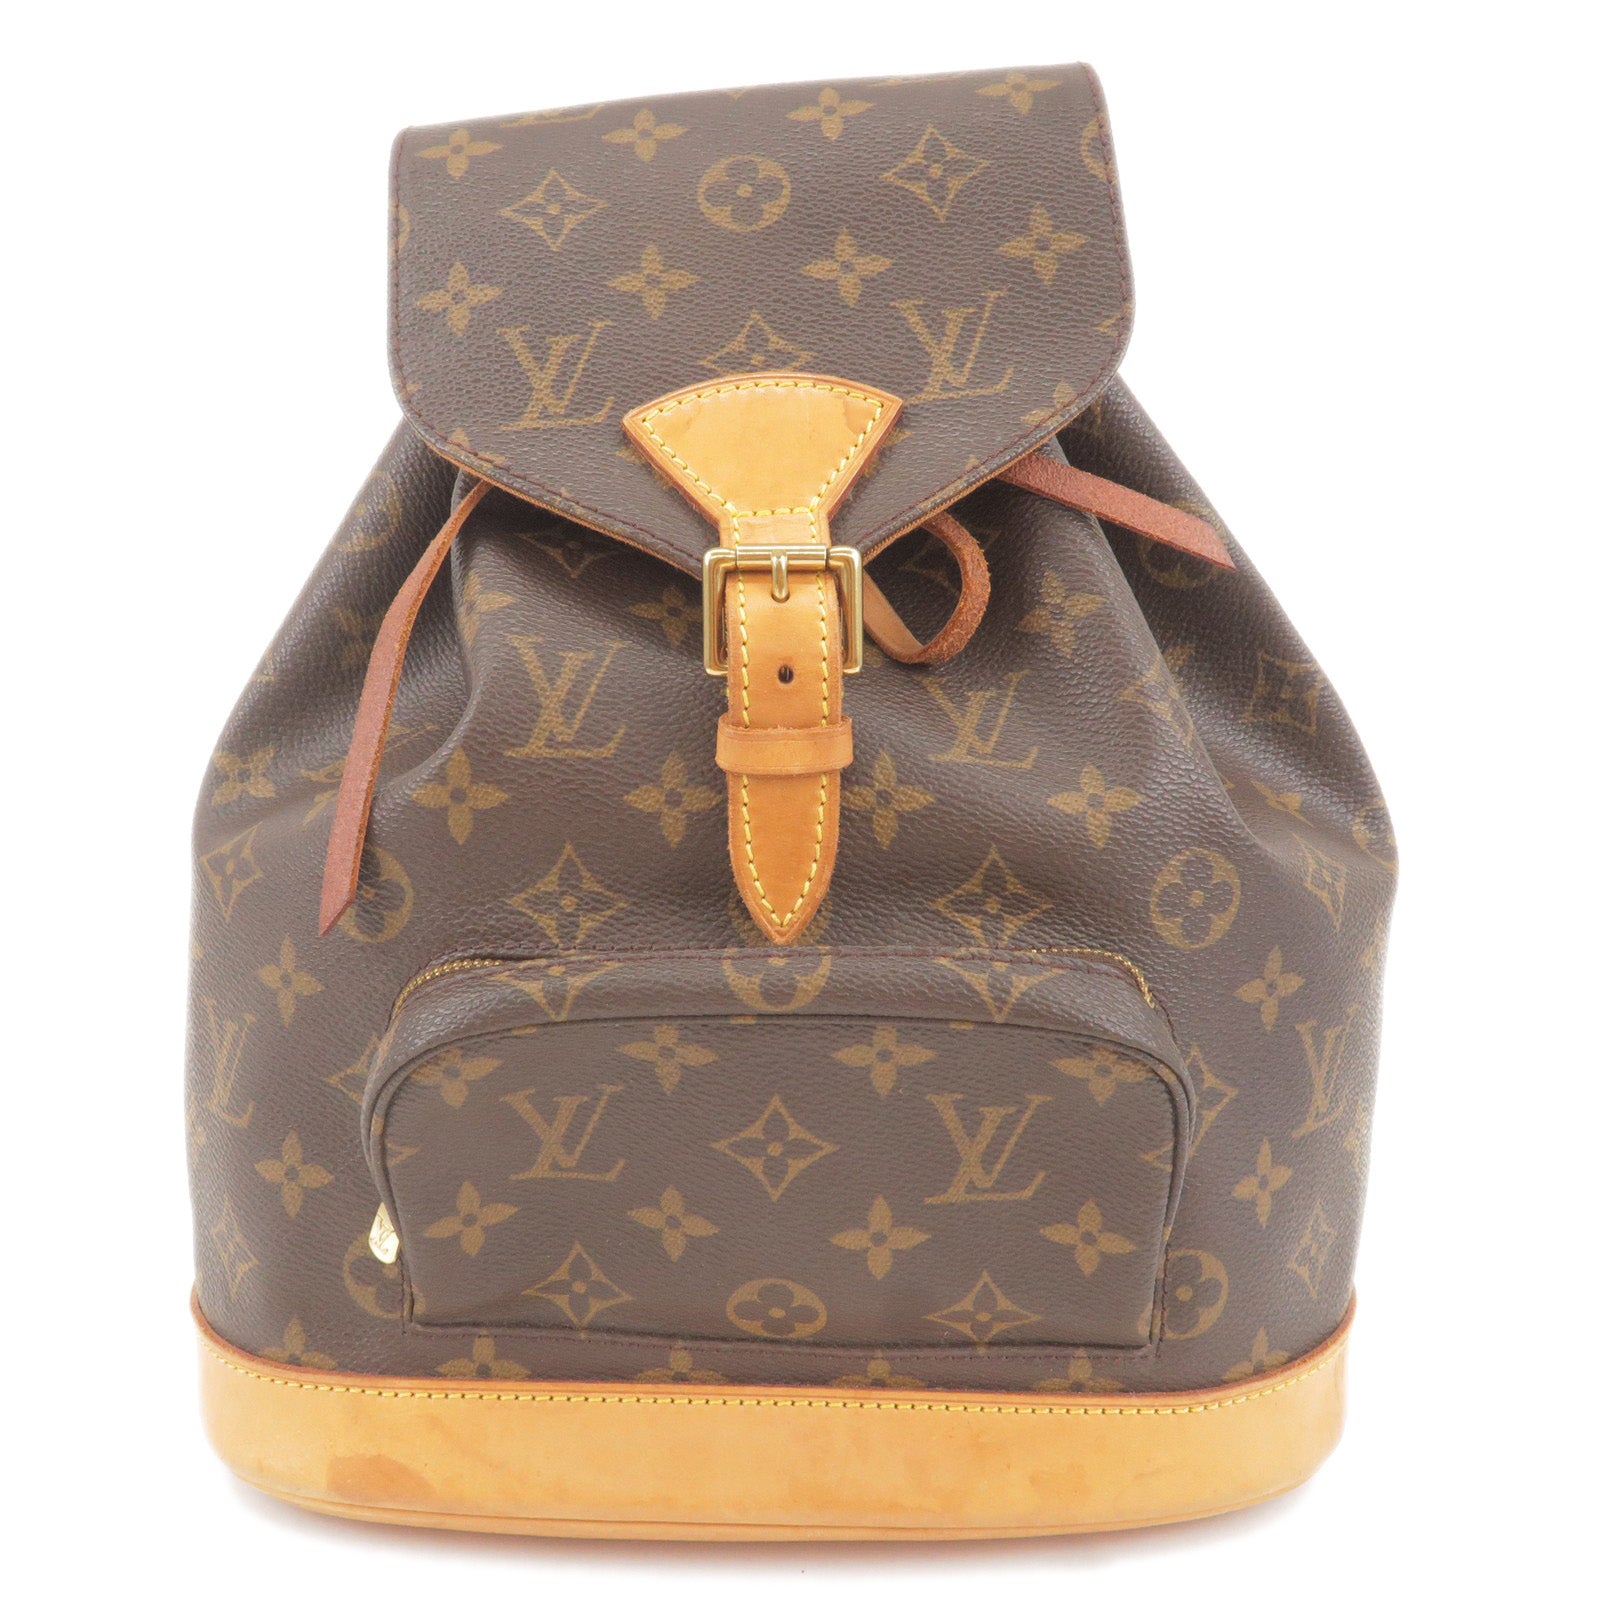 Unveiled in 2007, the Louis Vuitton Neverfull bag has become an